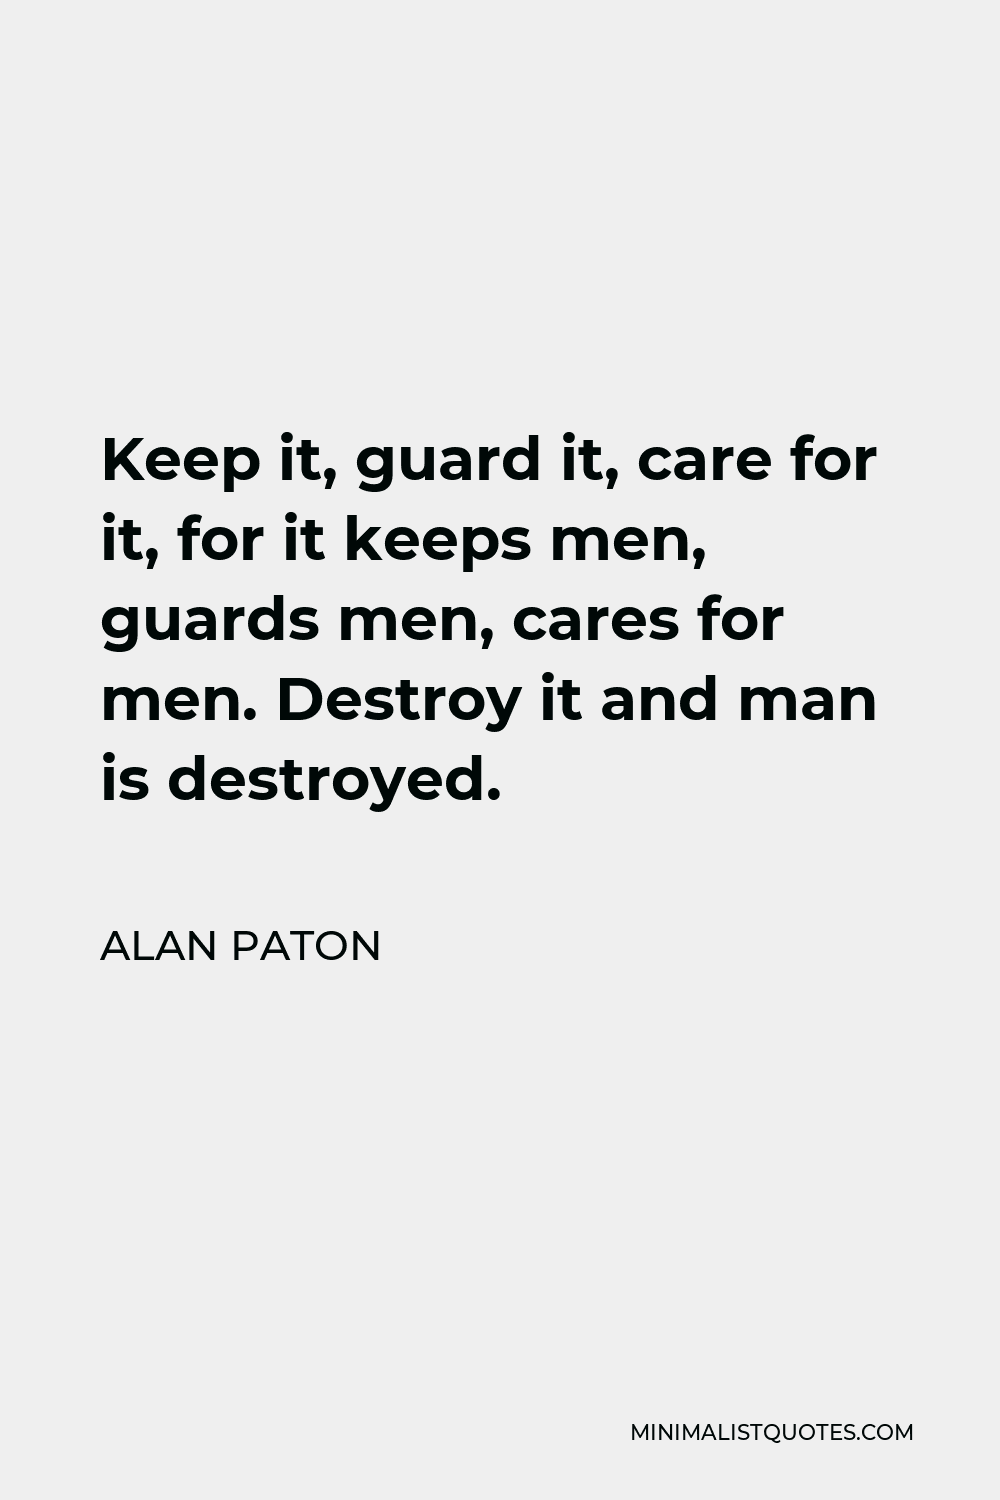 Alan Paton Quote - Keep it, guard it, care for it, for it keeps men, guards men, cares for men. Destroy it and man is destroyed.